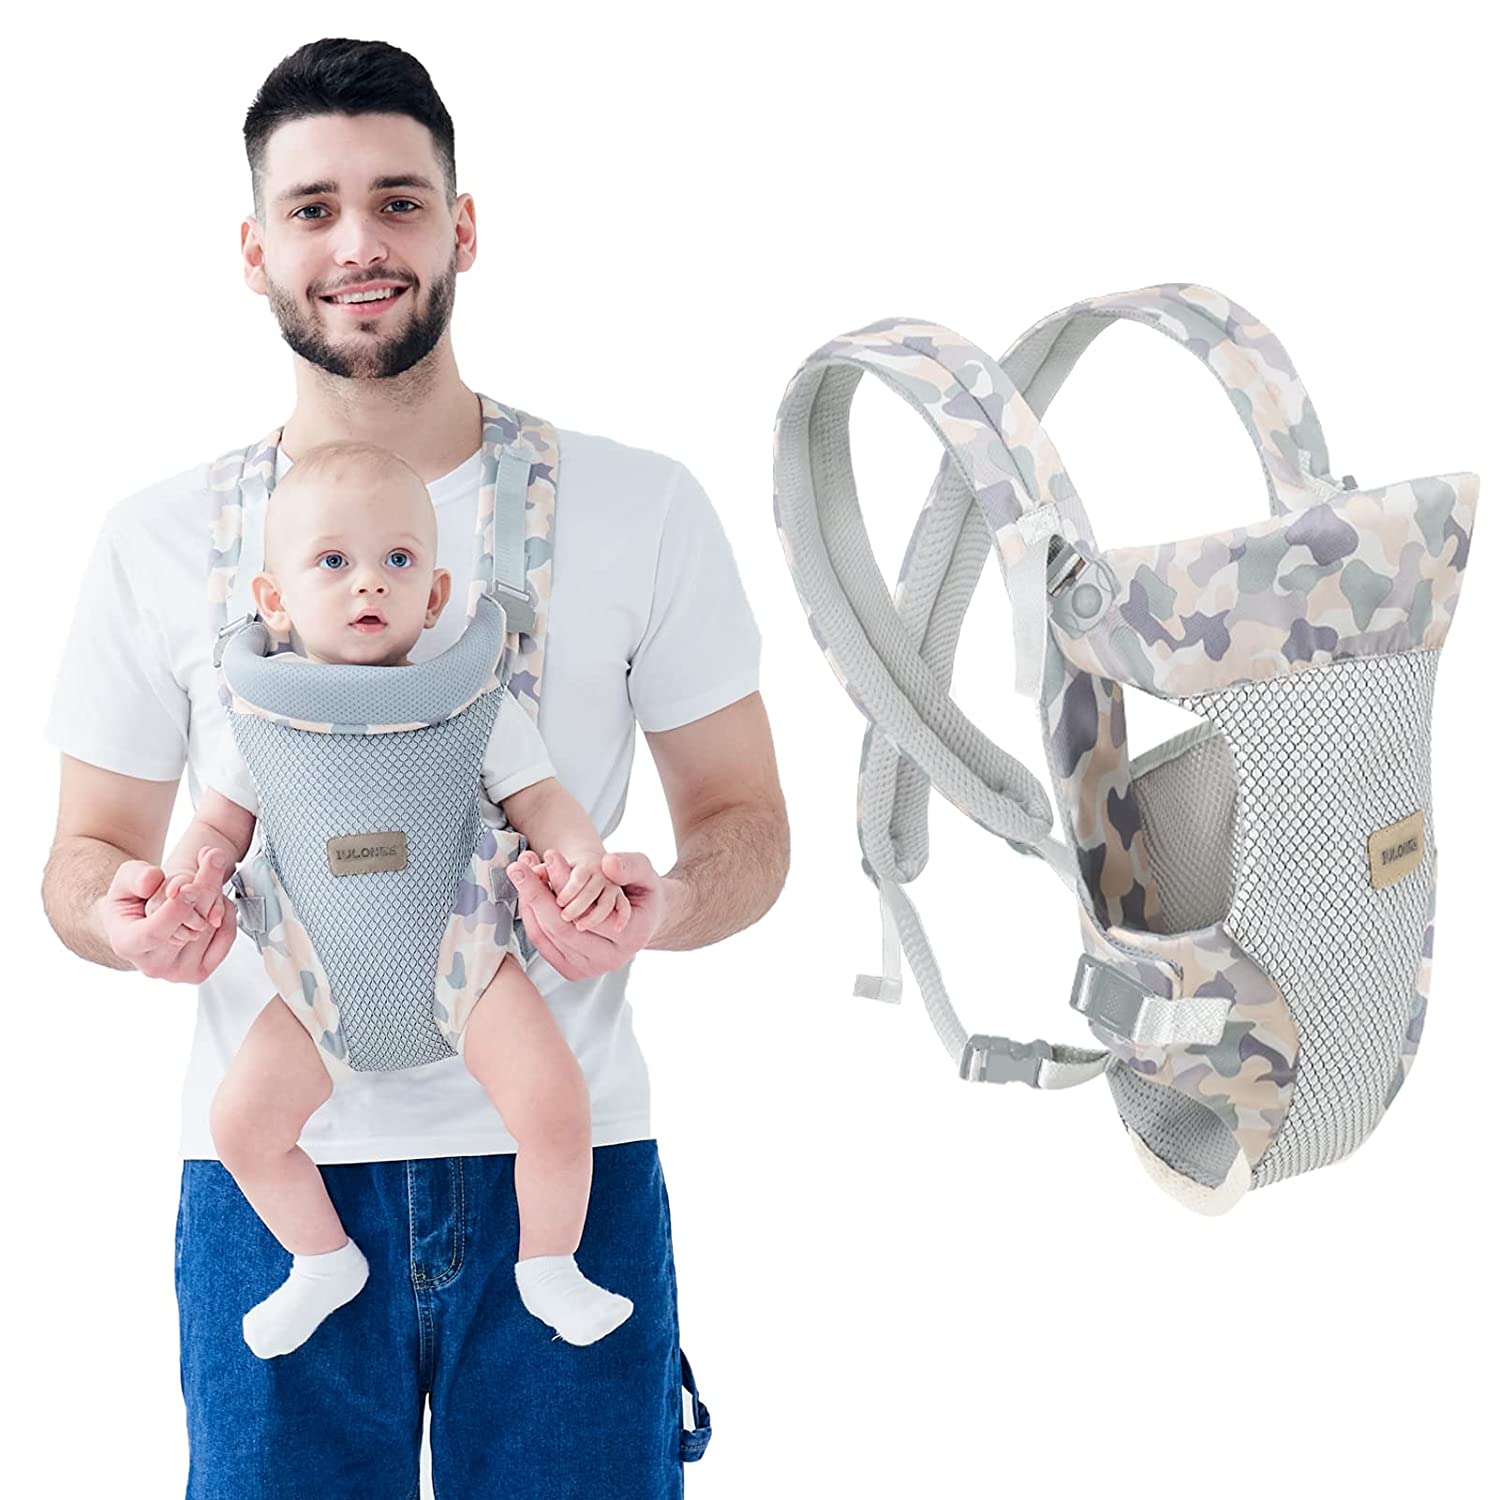 IULONEE Baby Carrier Sling with Adjustable Holder, Hugging Straps for Newborns, Multifunctional Carry Straps, Toddler Carrier Sling, 3-36 Months, Grey